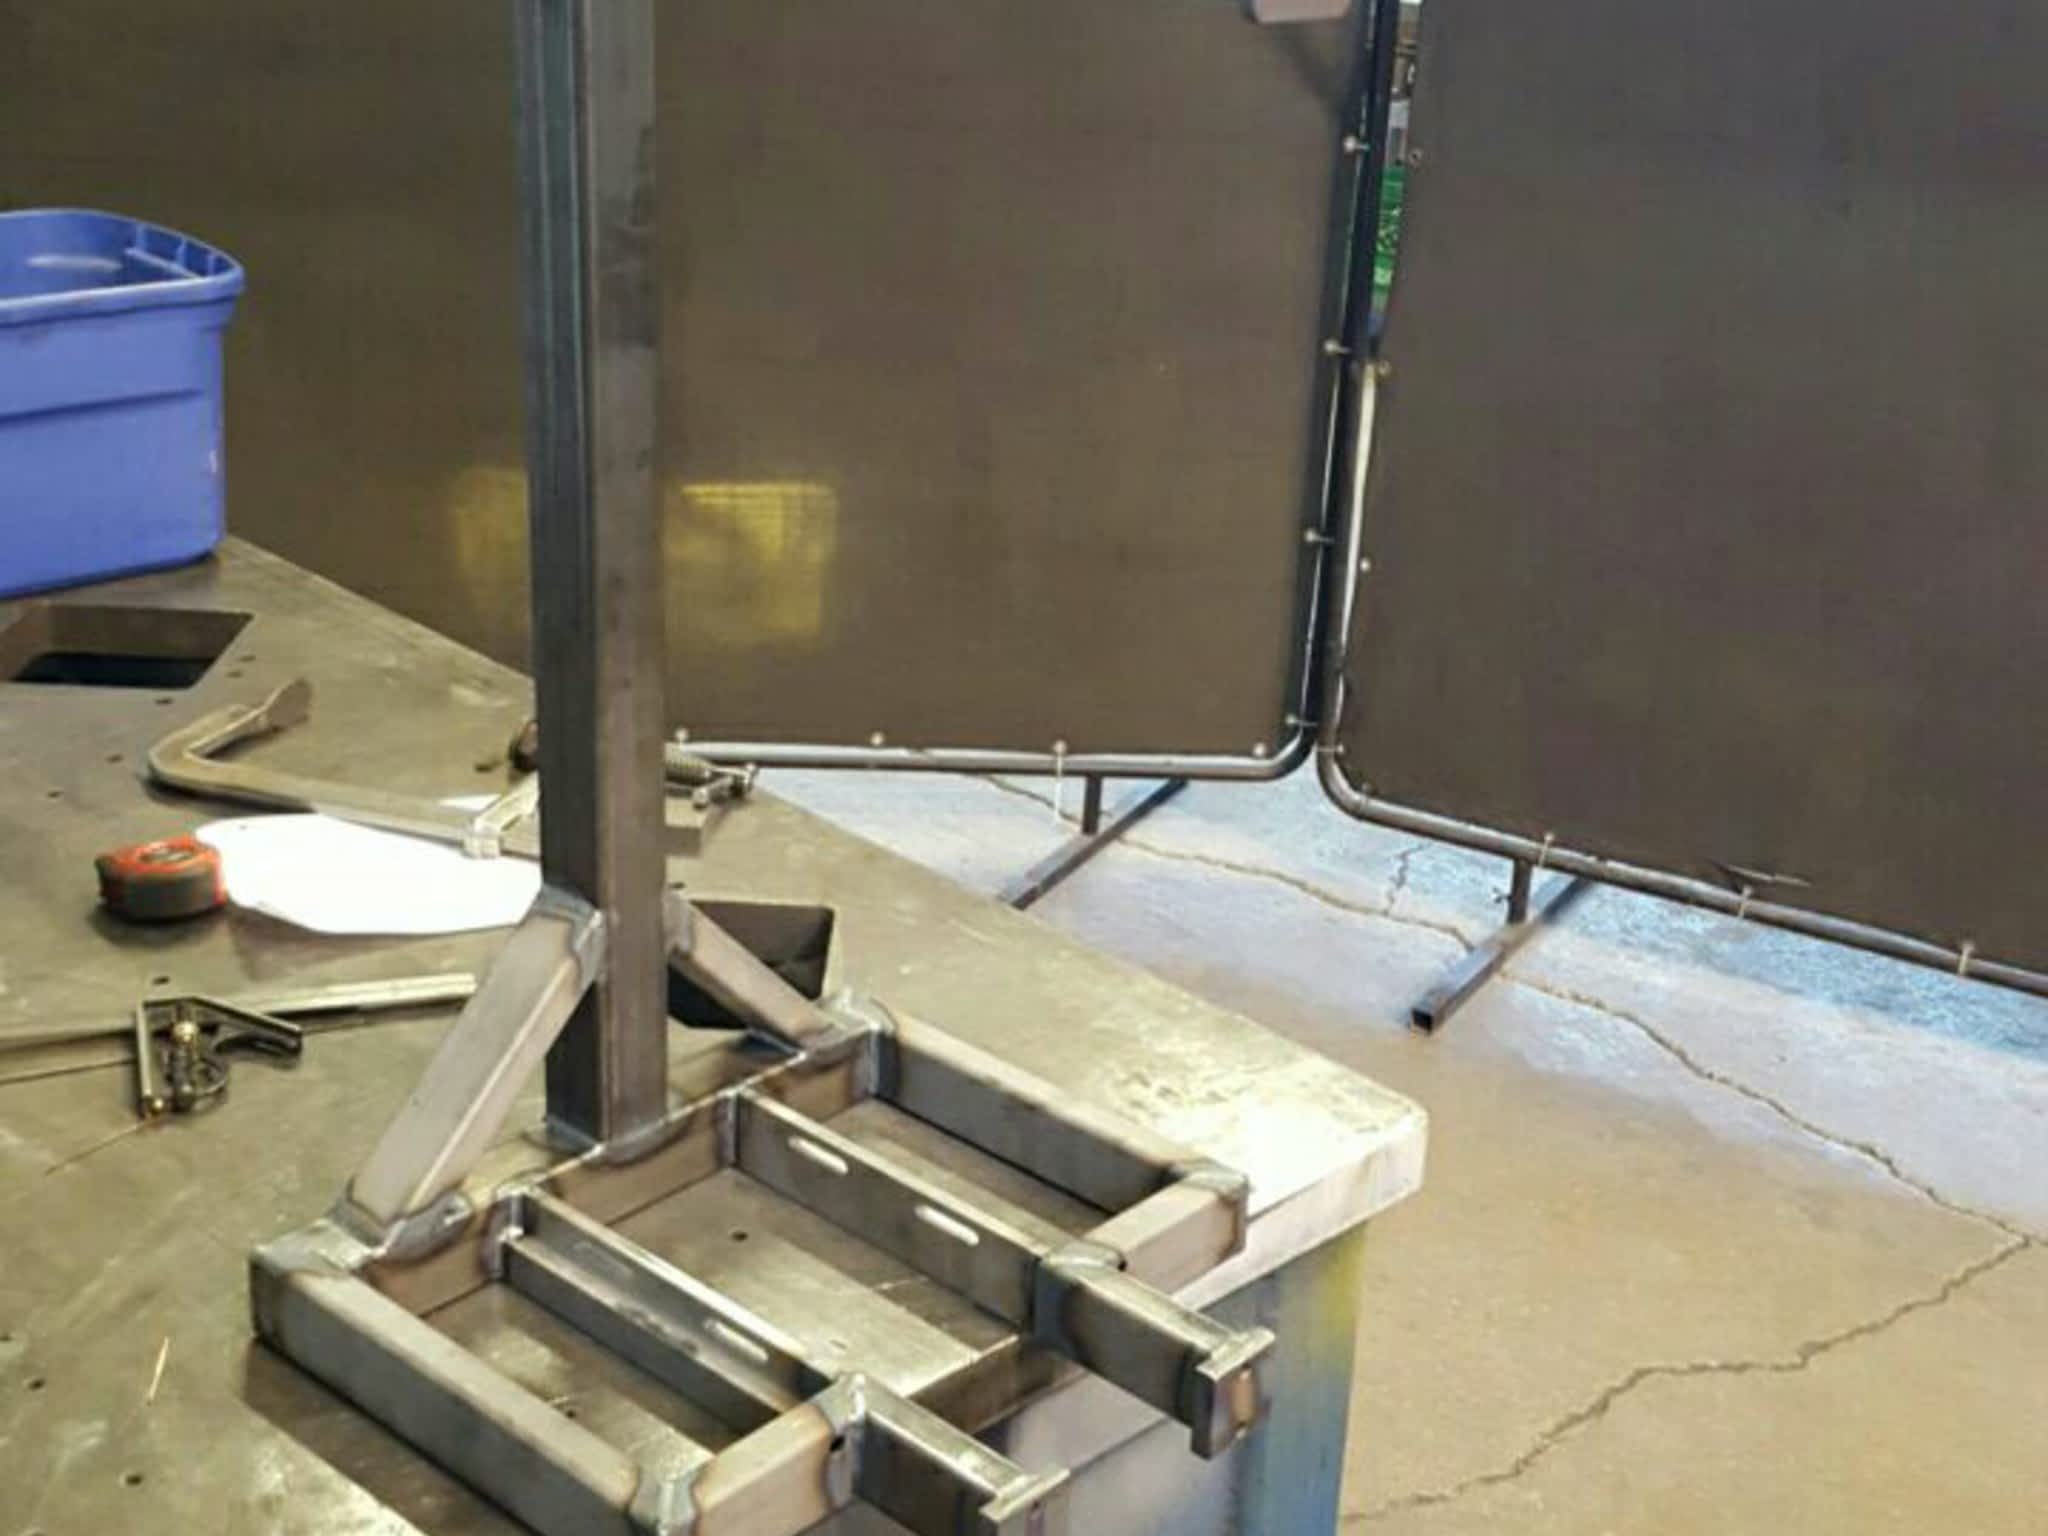 photo Springwater Mobile Welding & Fabrication Services